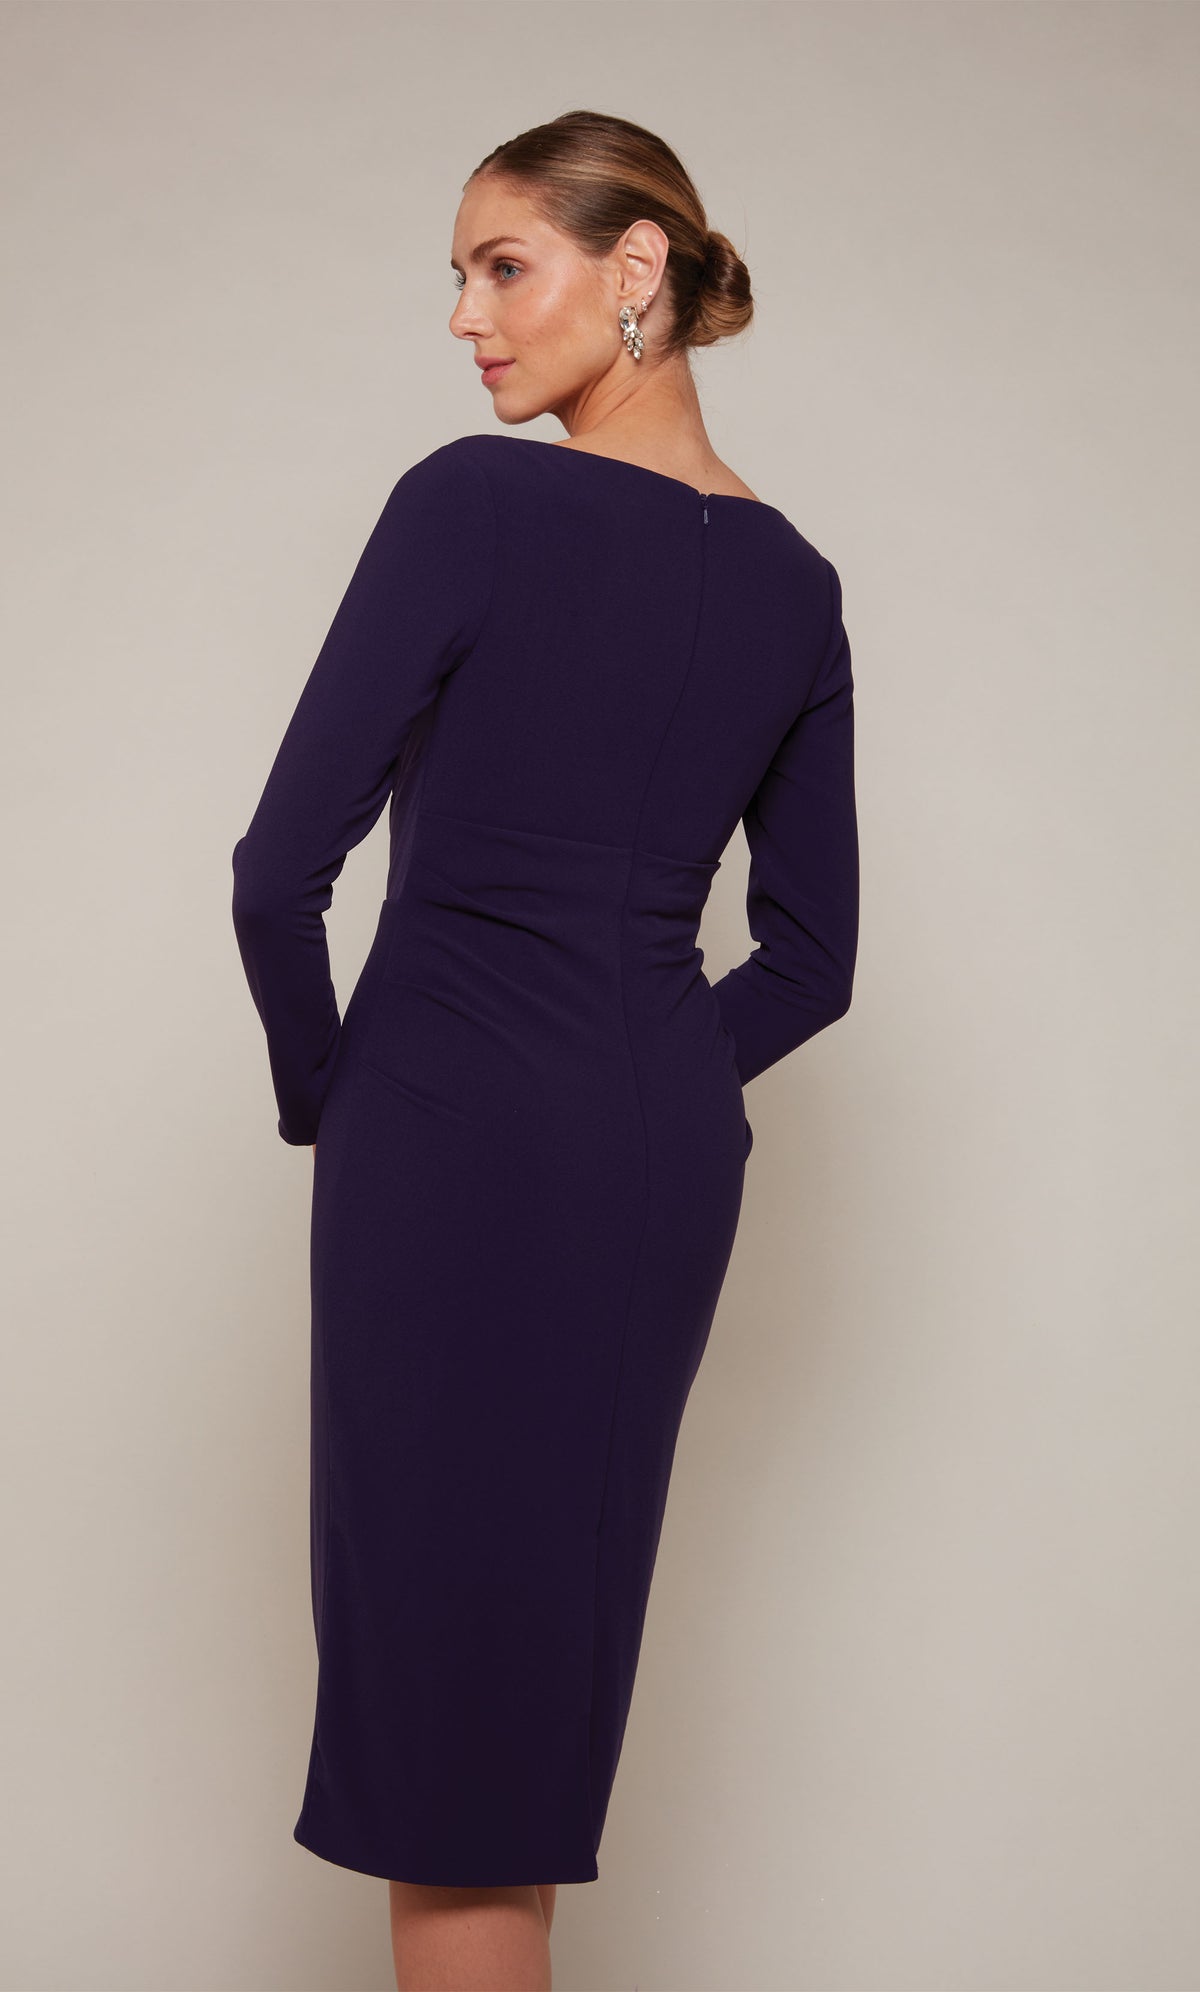 A knee length cocktail dress with long sleeves and a closed zip-up back in dark purple.